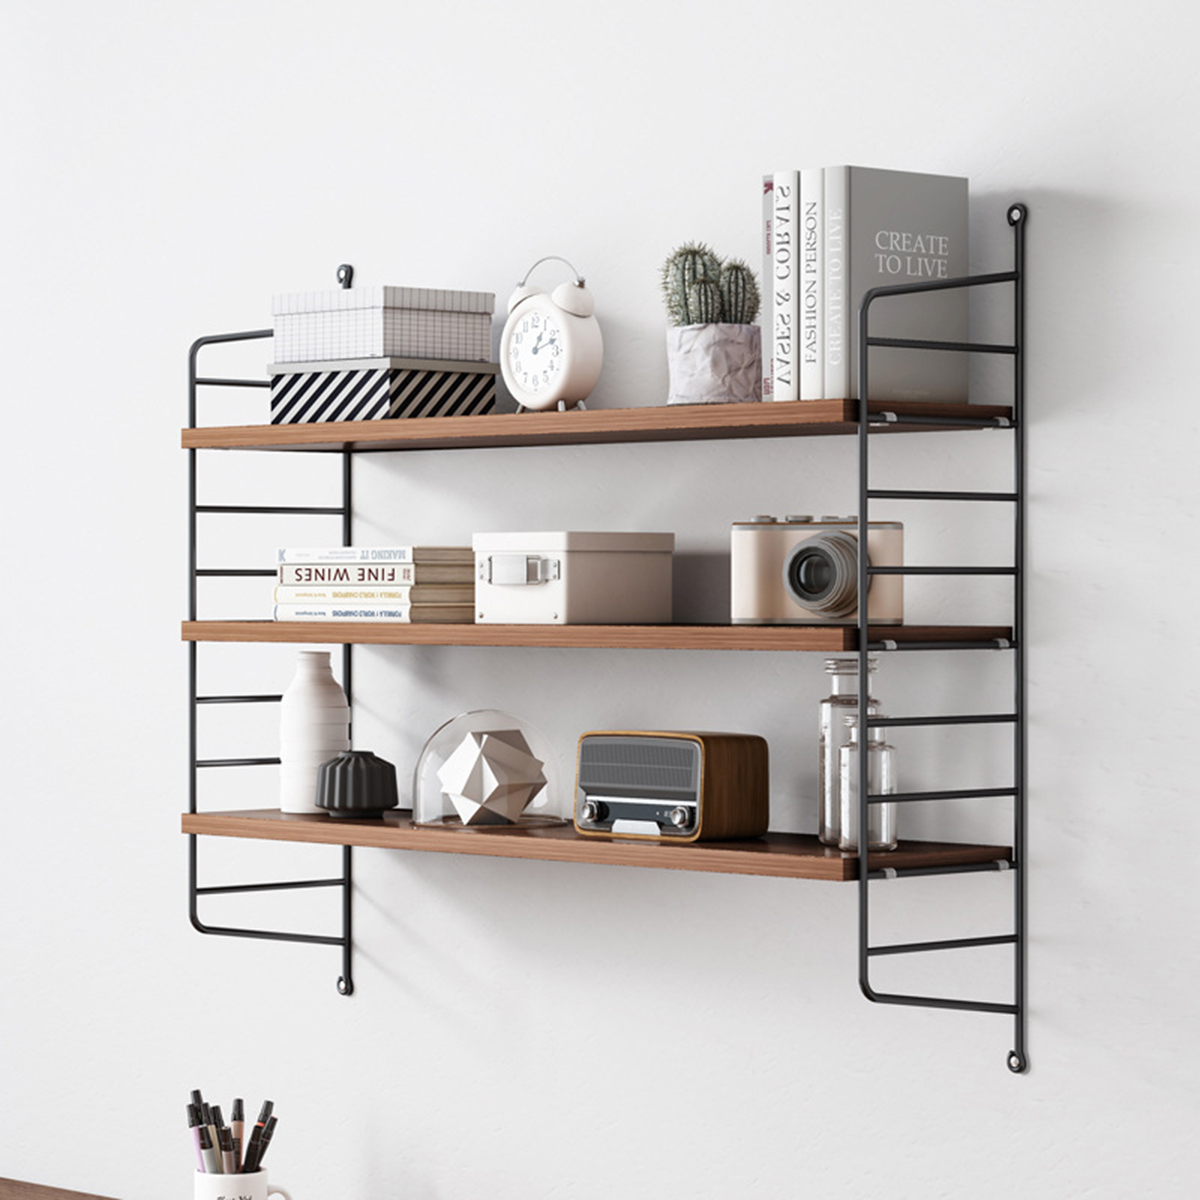 3-Tiers-Wall-Mounted-Shelf-Punch-free-Hanging-Storage-Rack-Bedroom-Bookshelf-Home-Office-Decoration--1788421-1